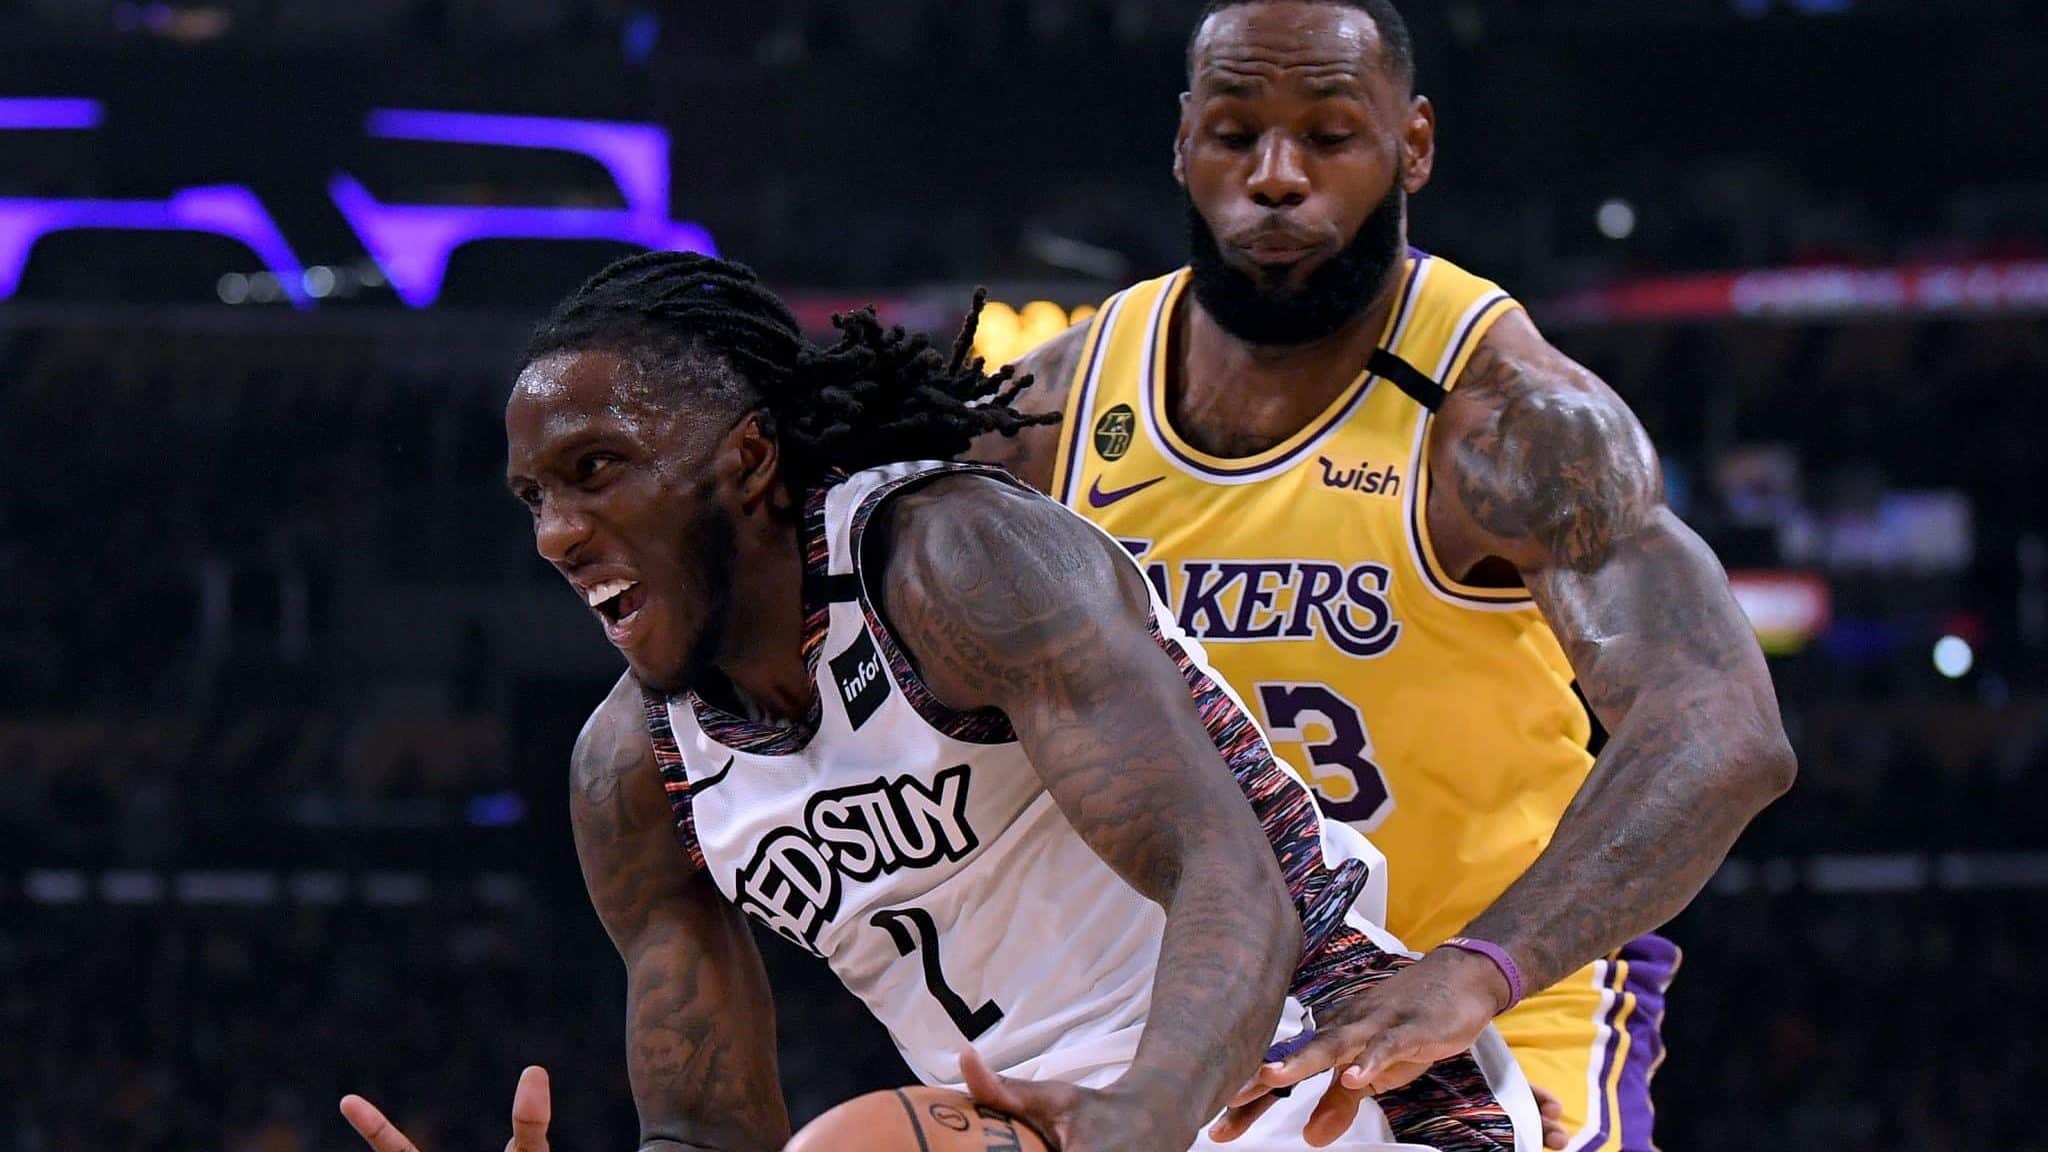 LOS ANGELES, CALIFORNIA - MARCH 10: Taurean Prince #2 of the Brooklyn Nets dribbles past LeBron James #23 of the Los Angeles Lakers during the first half at Staples Center on March 10, 2020 in Los Angeles, California.